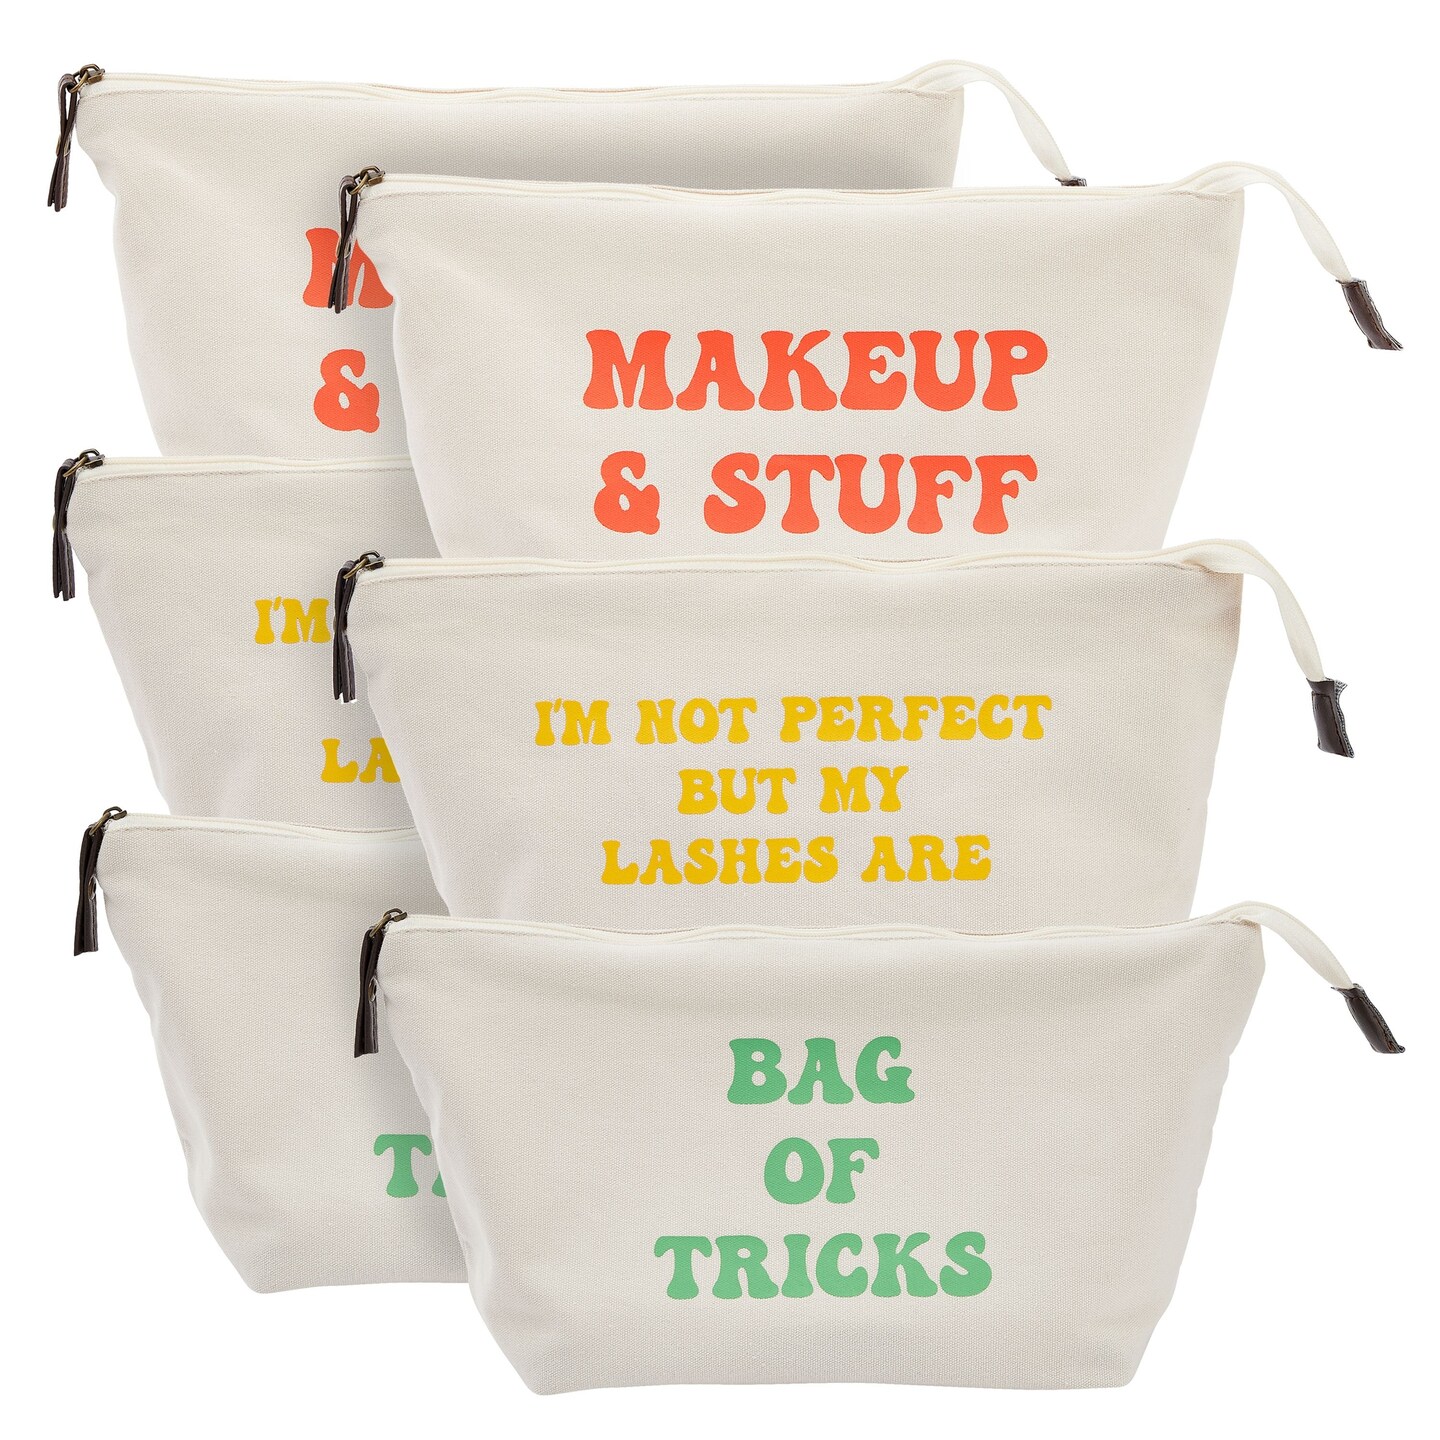 6 Pack Small Canvas Makeup Bags with Zipper for Women, 3 Designs